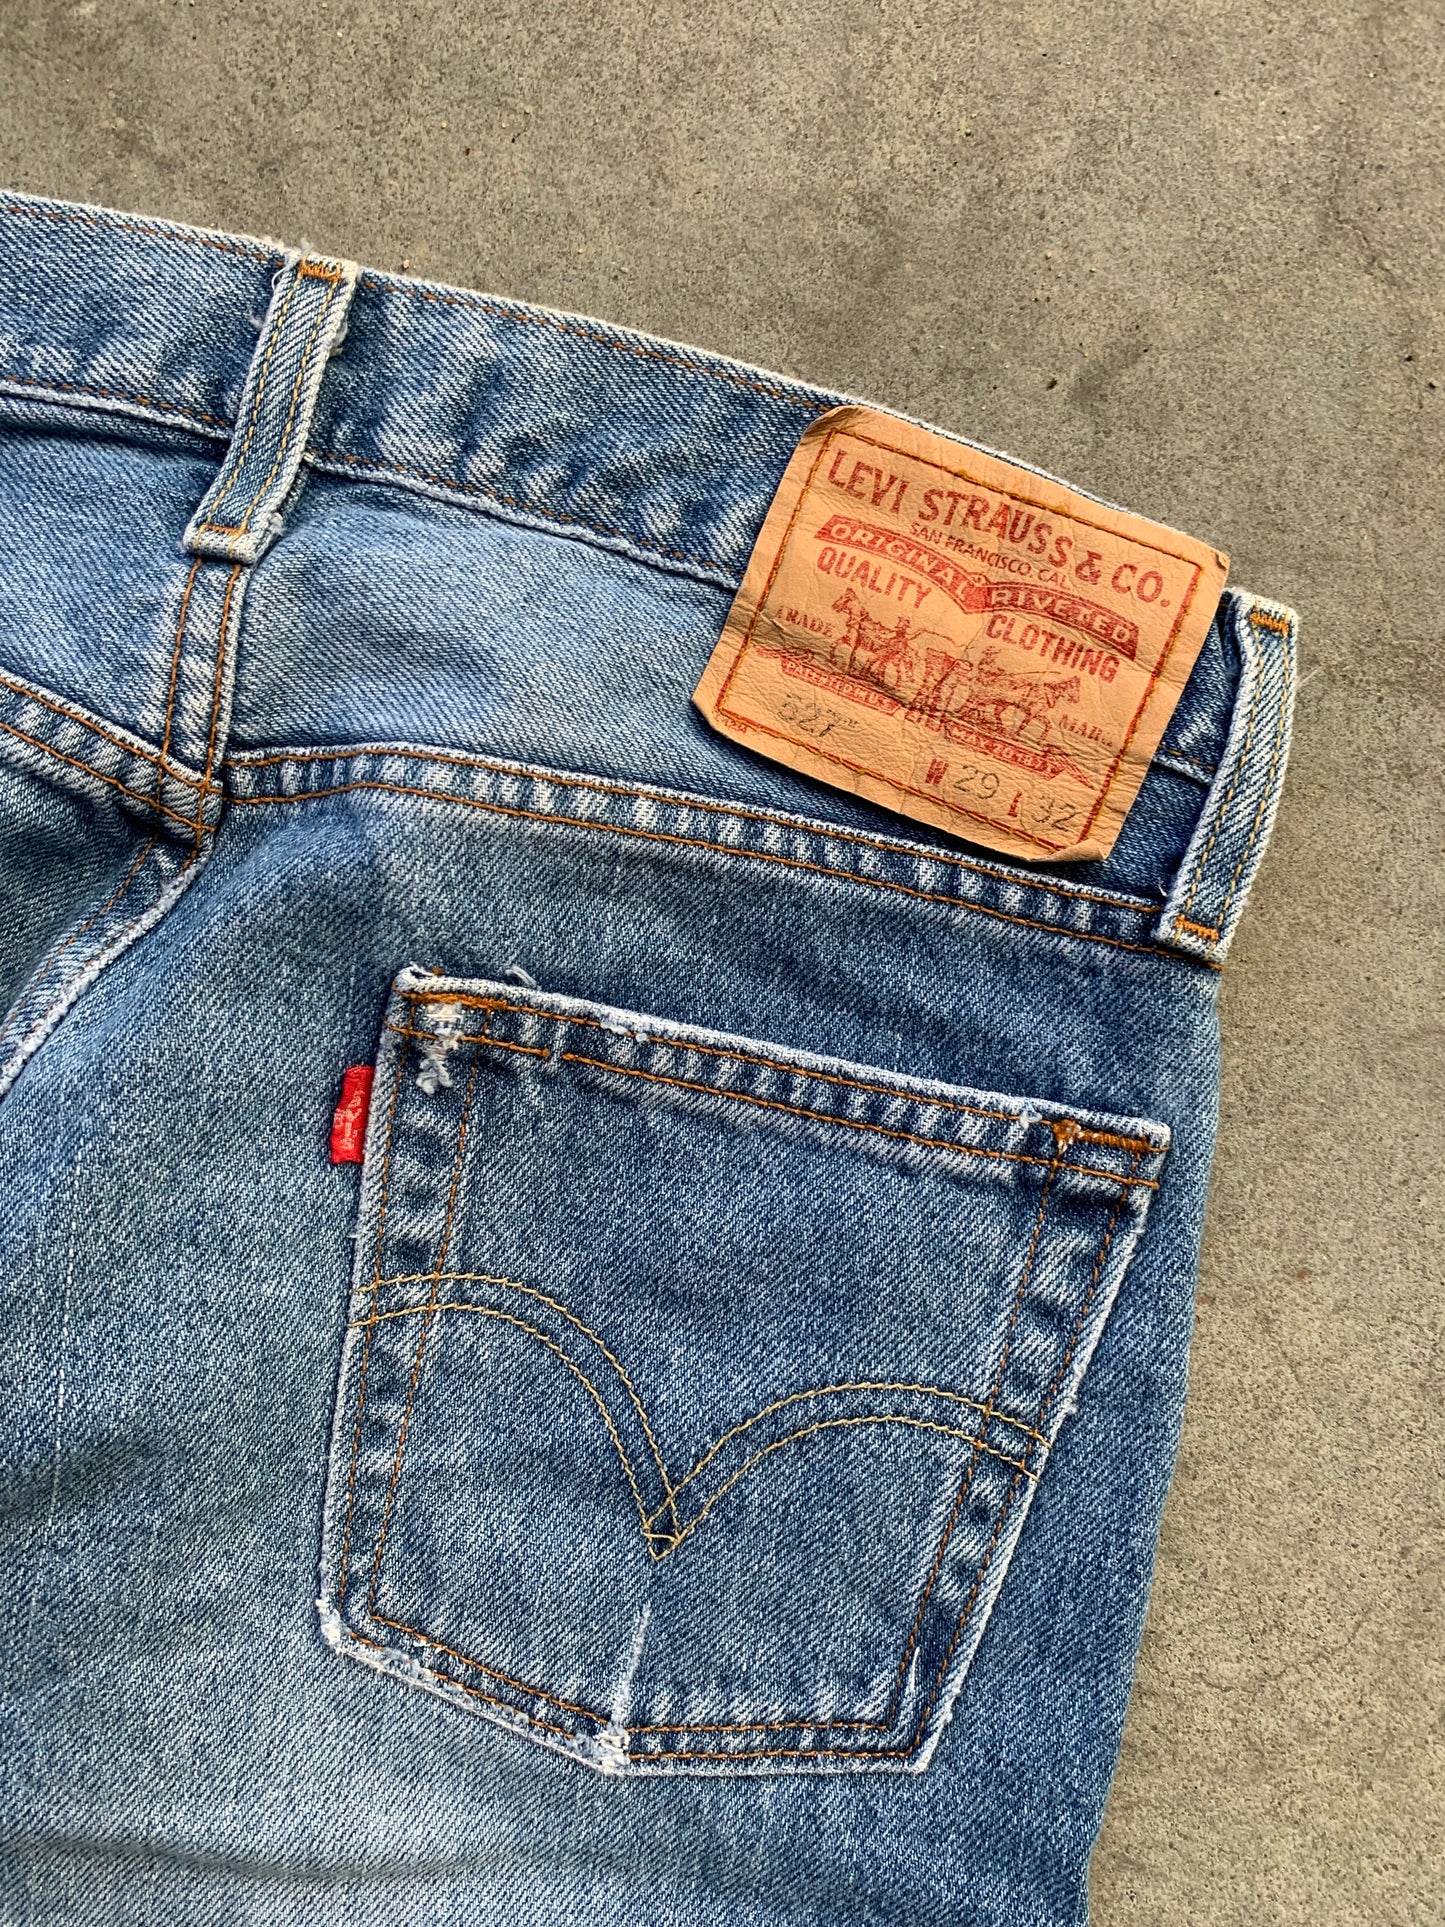 (29”) Levi’s Distressed Bootcut Jeans